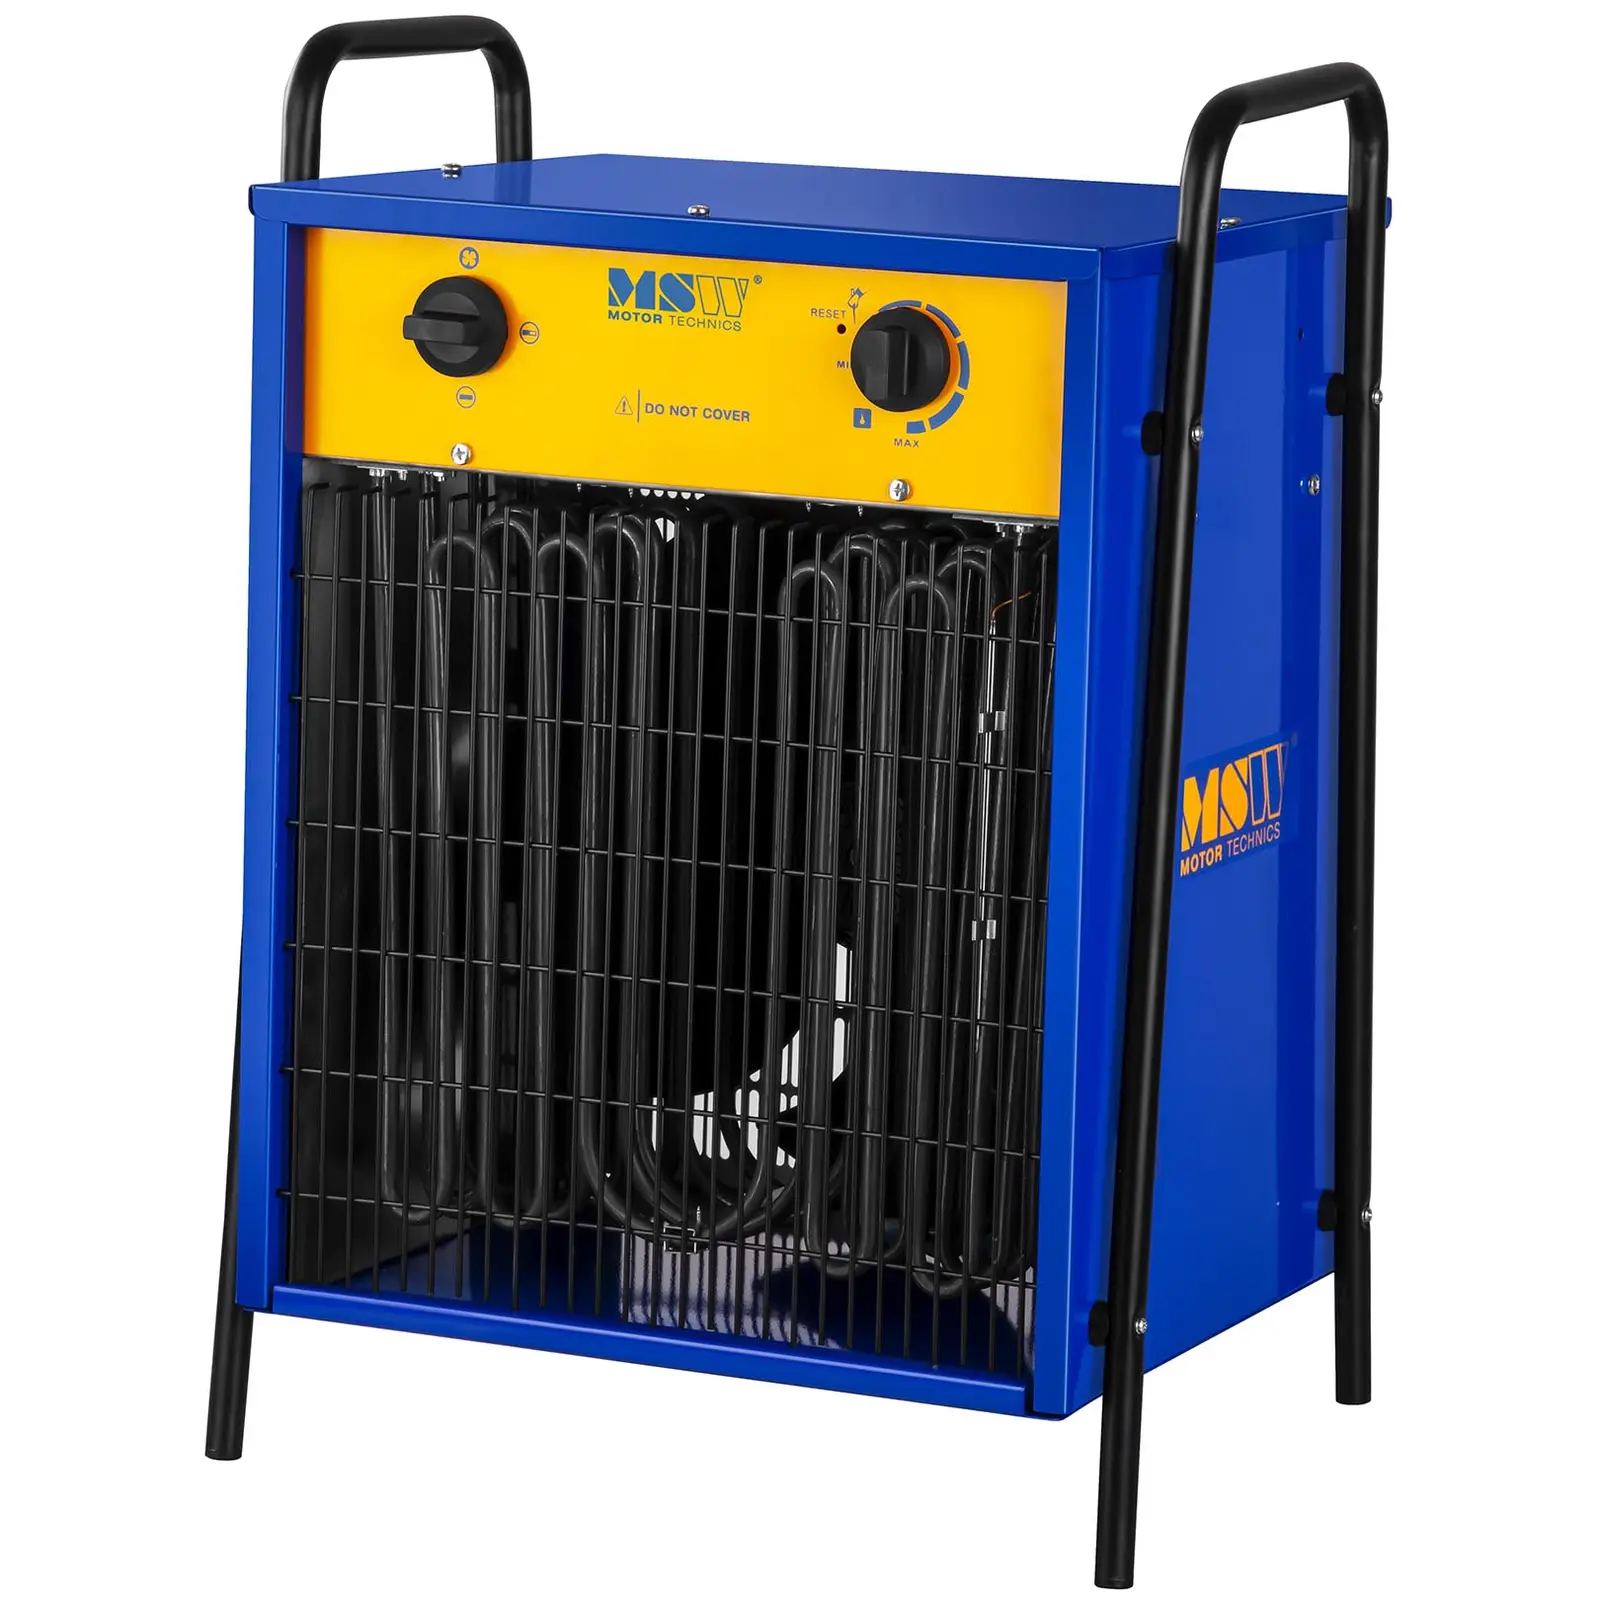 Factory second Industrial Electric Heater with Cooling Function - 0 to 40 °C - 22.000 W